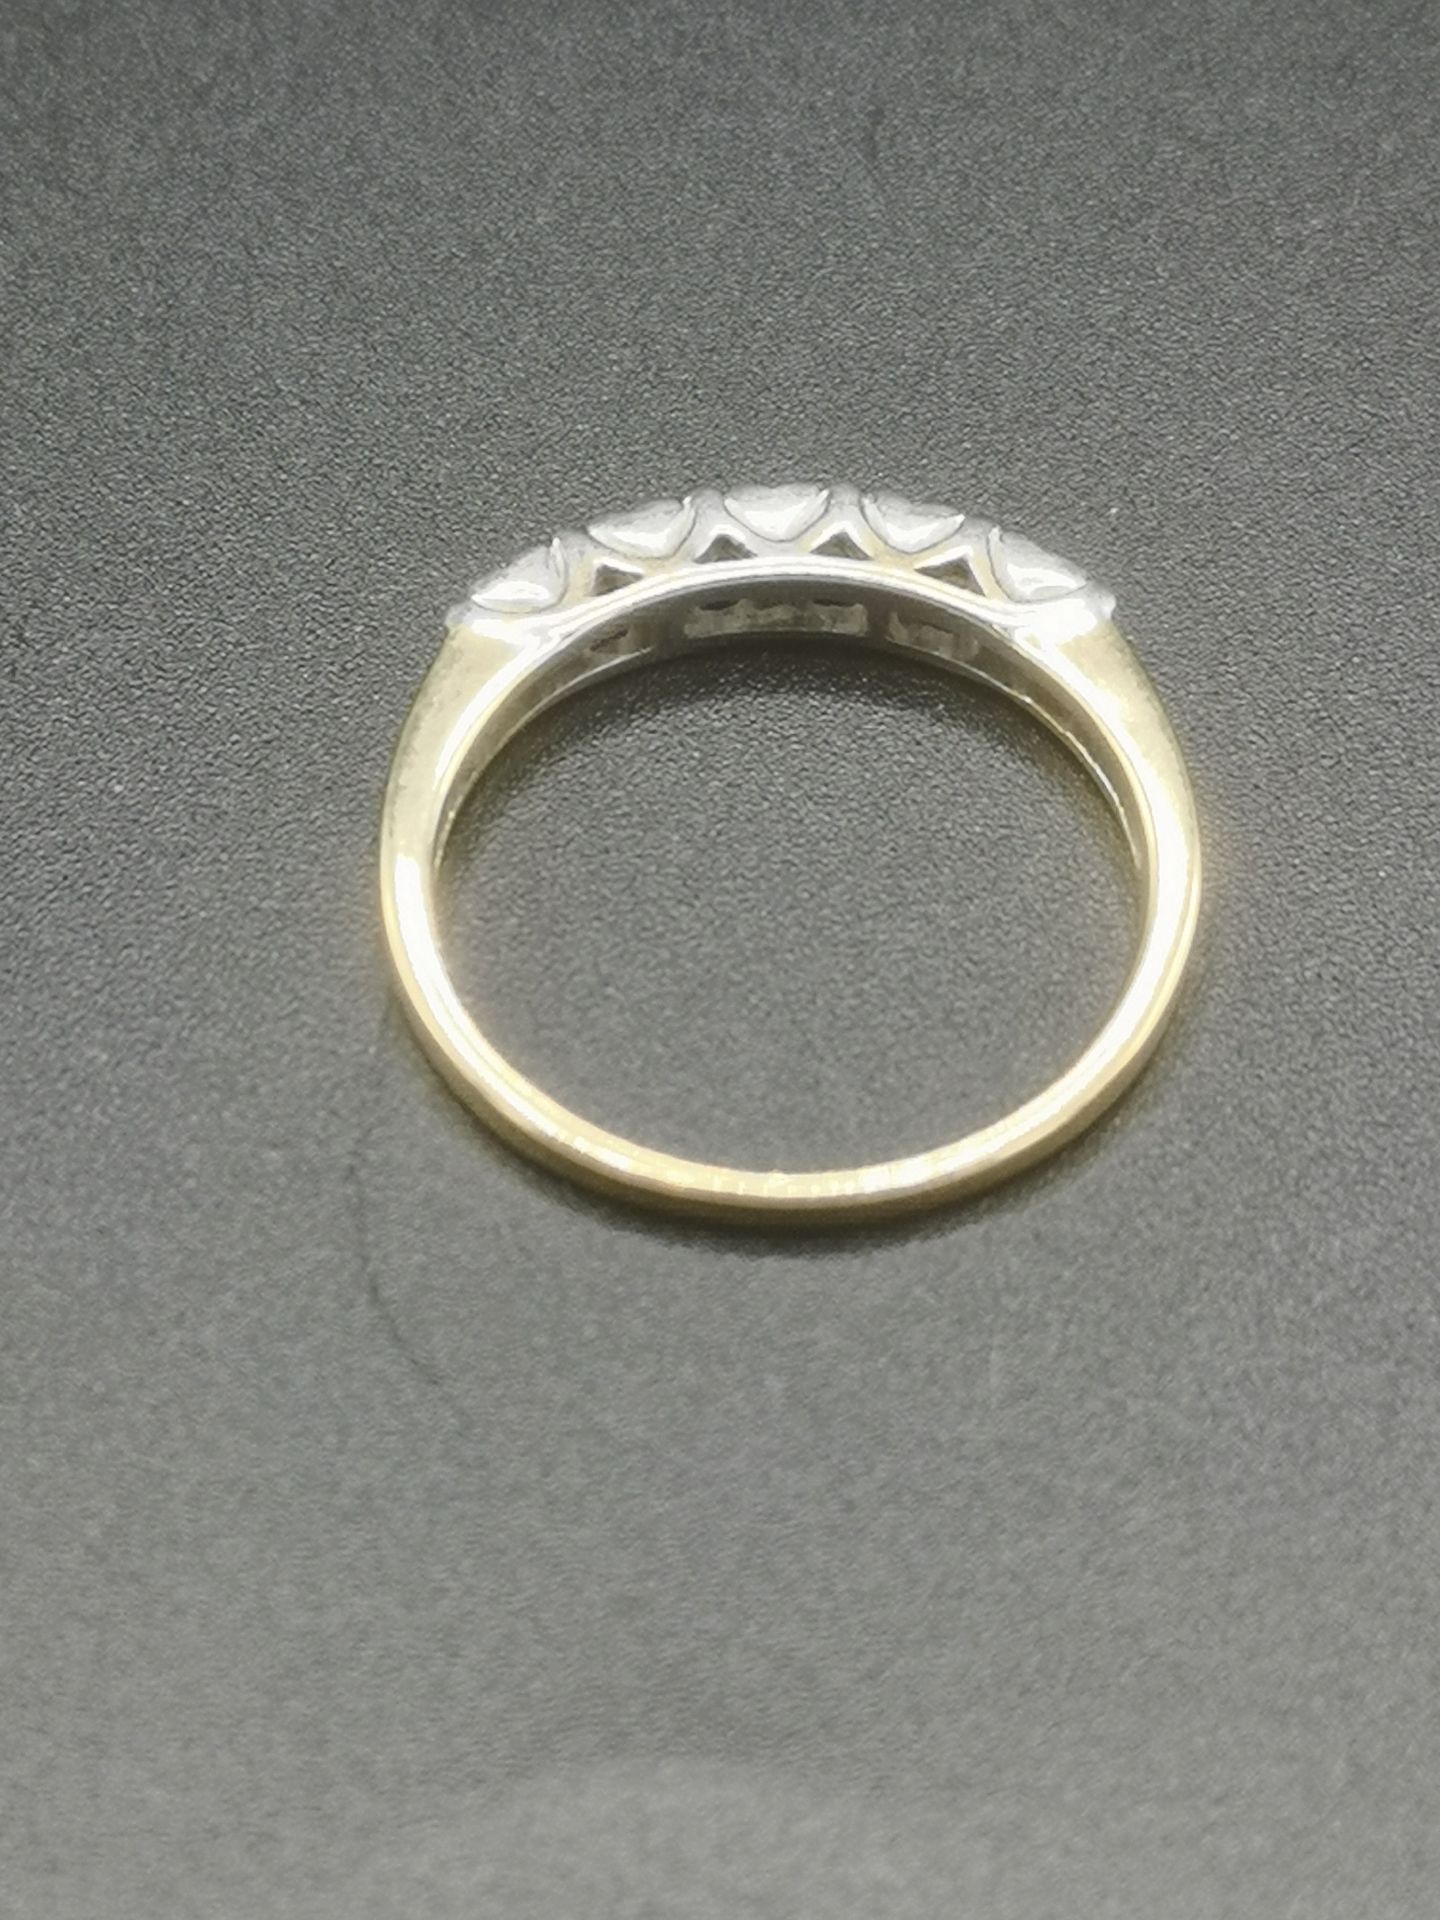 9ct gold ring with channel set diamonds - Image 4 of 5